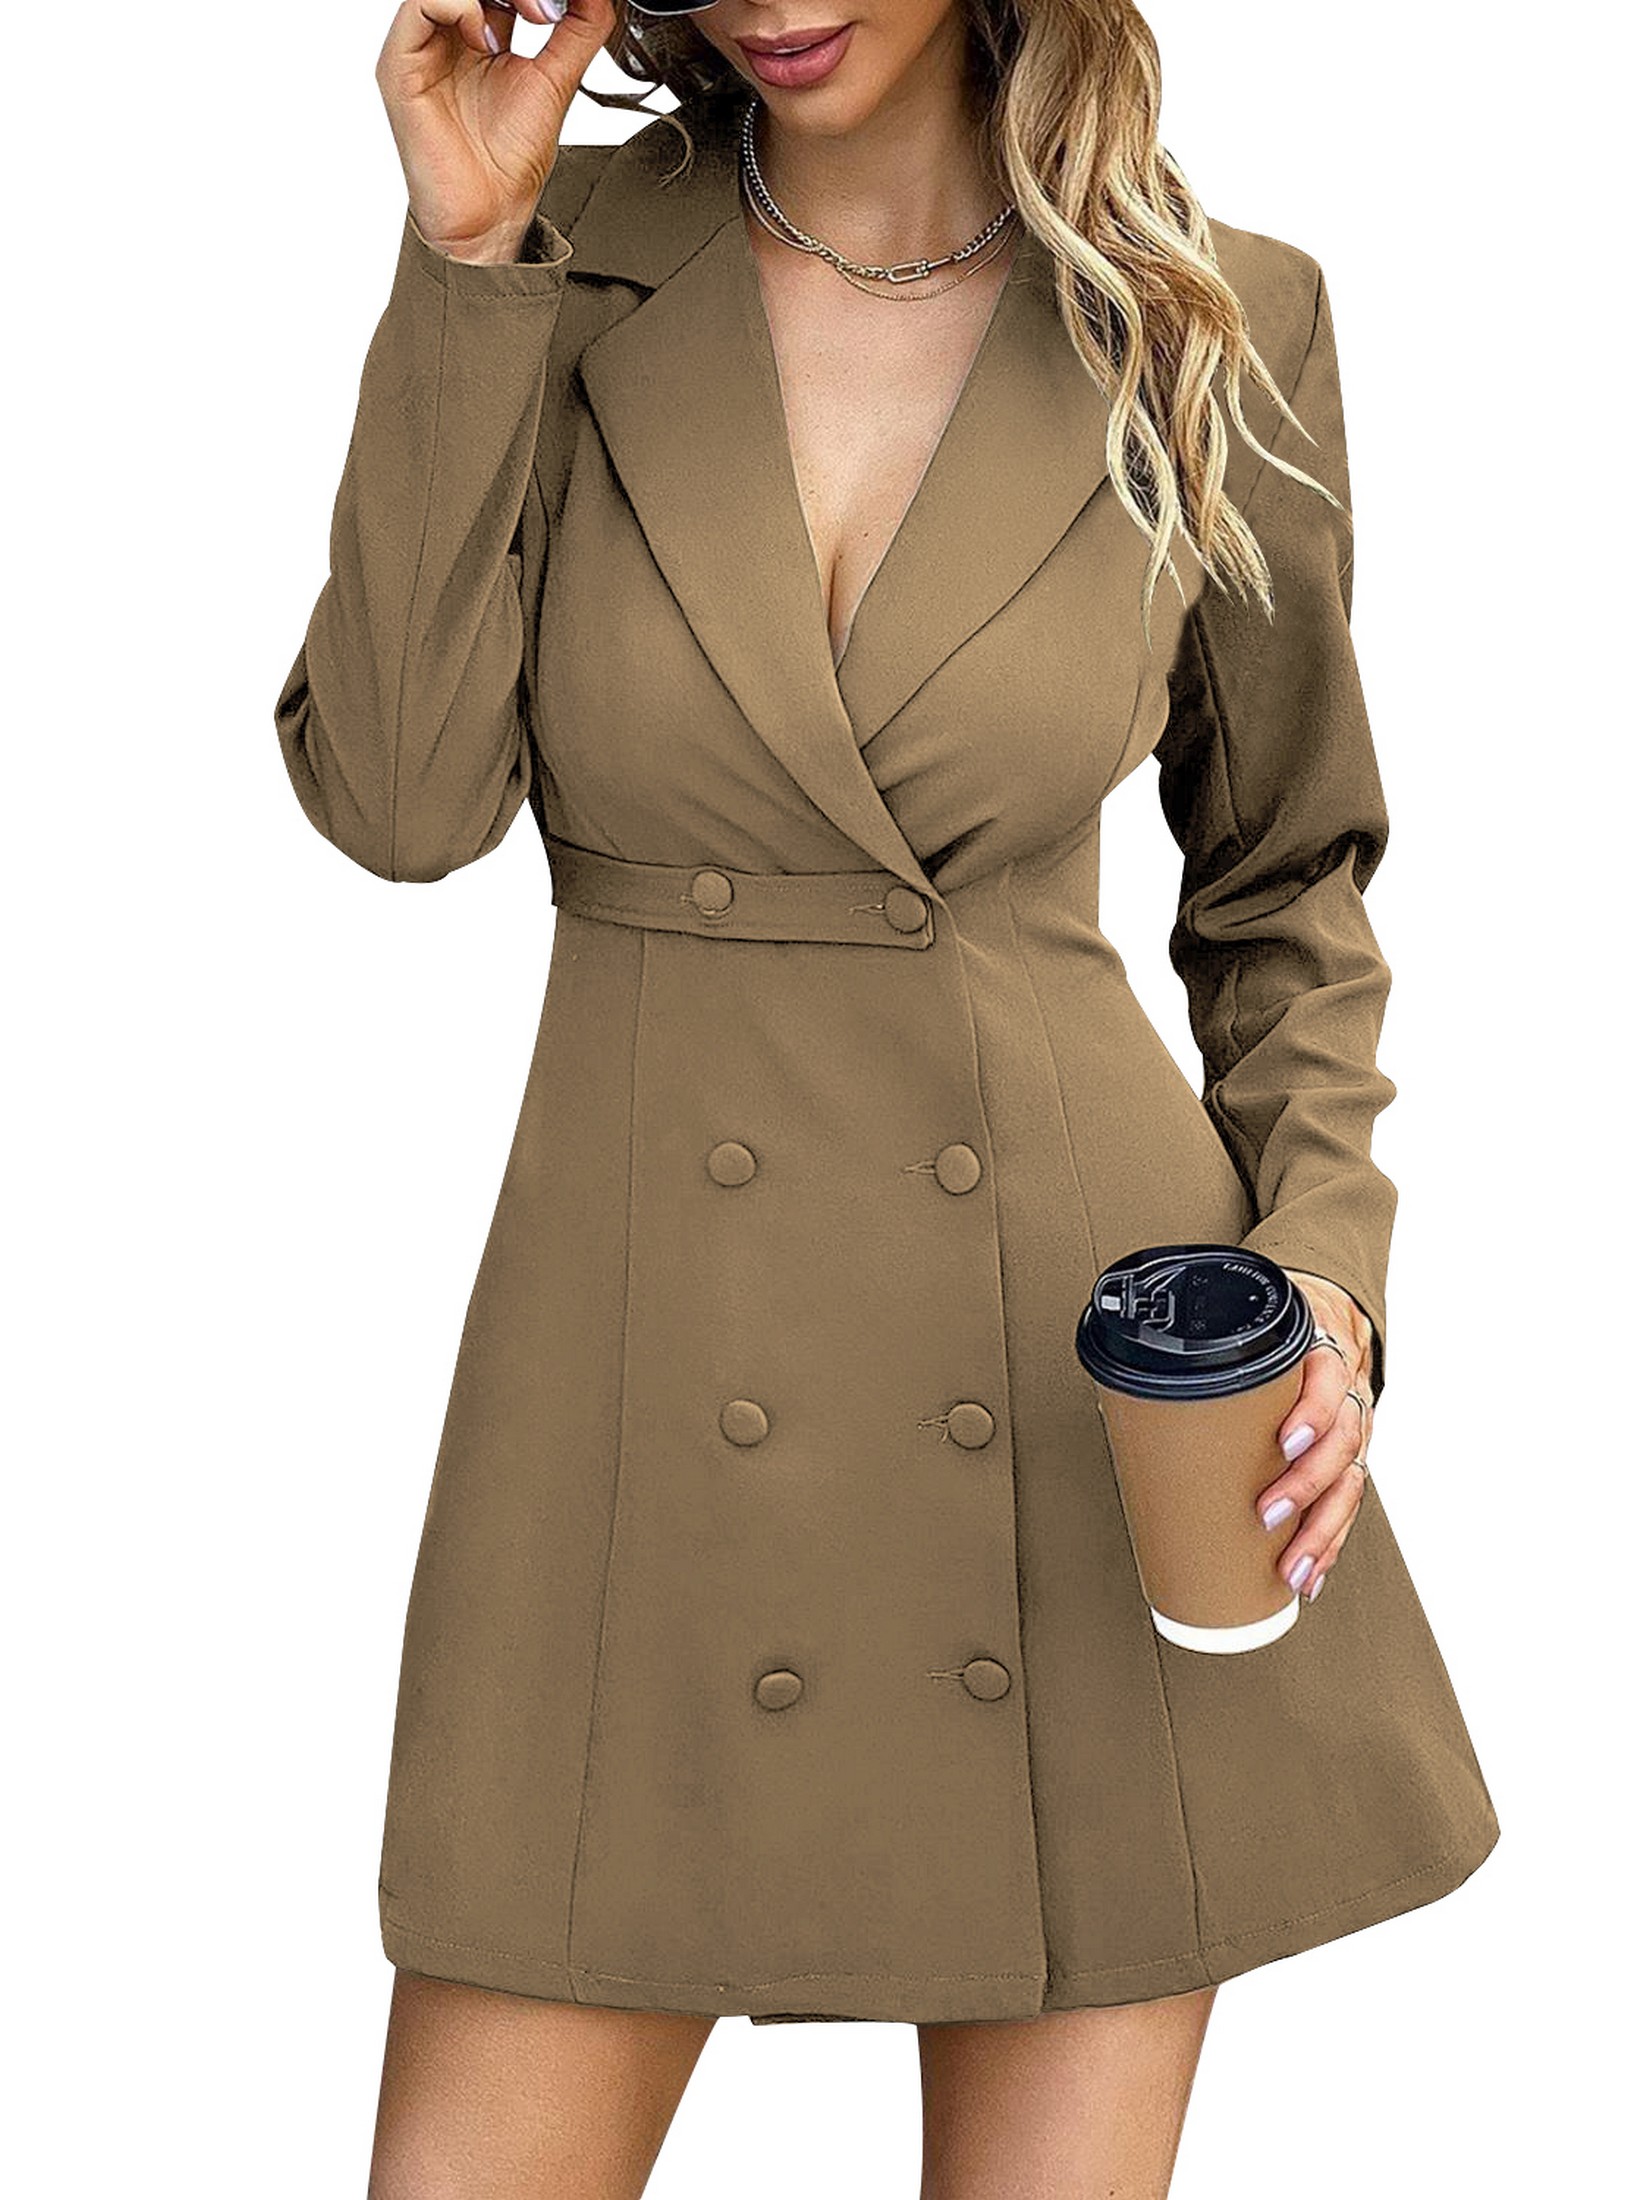 Gradient Color Office Suit For Women Jacket With Lapel V Neck, Long  Sleeves, Corset, And Zipper Closure Perfect For Office And Formal Occasions  From Jinjingba, $21.85